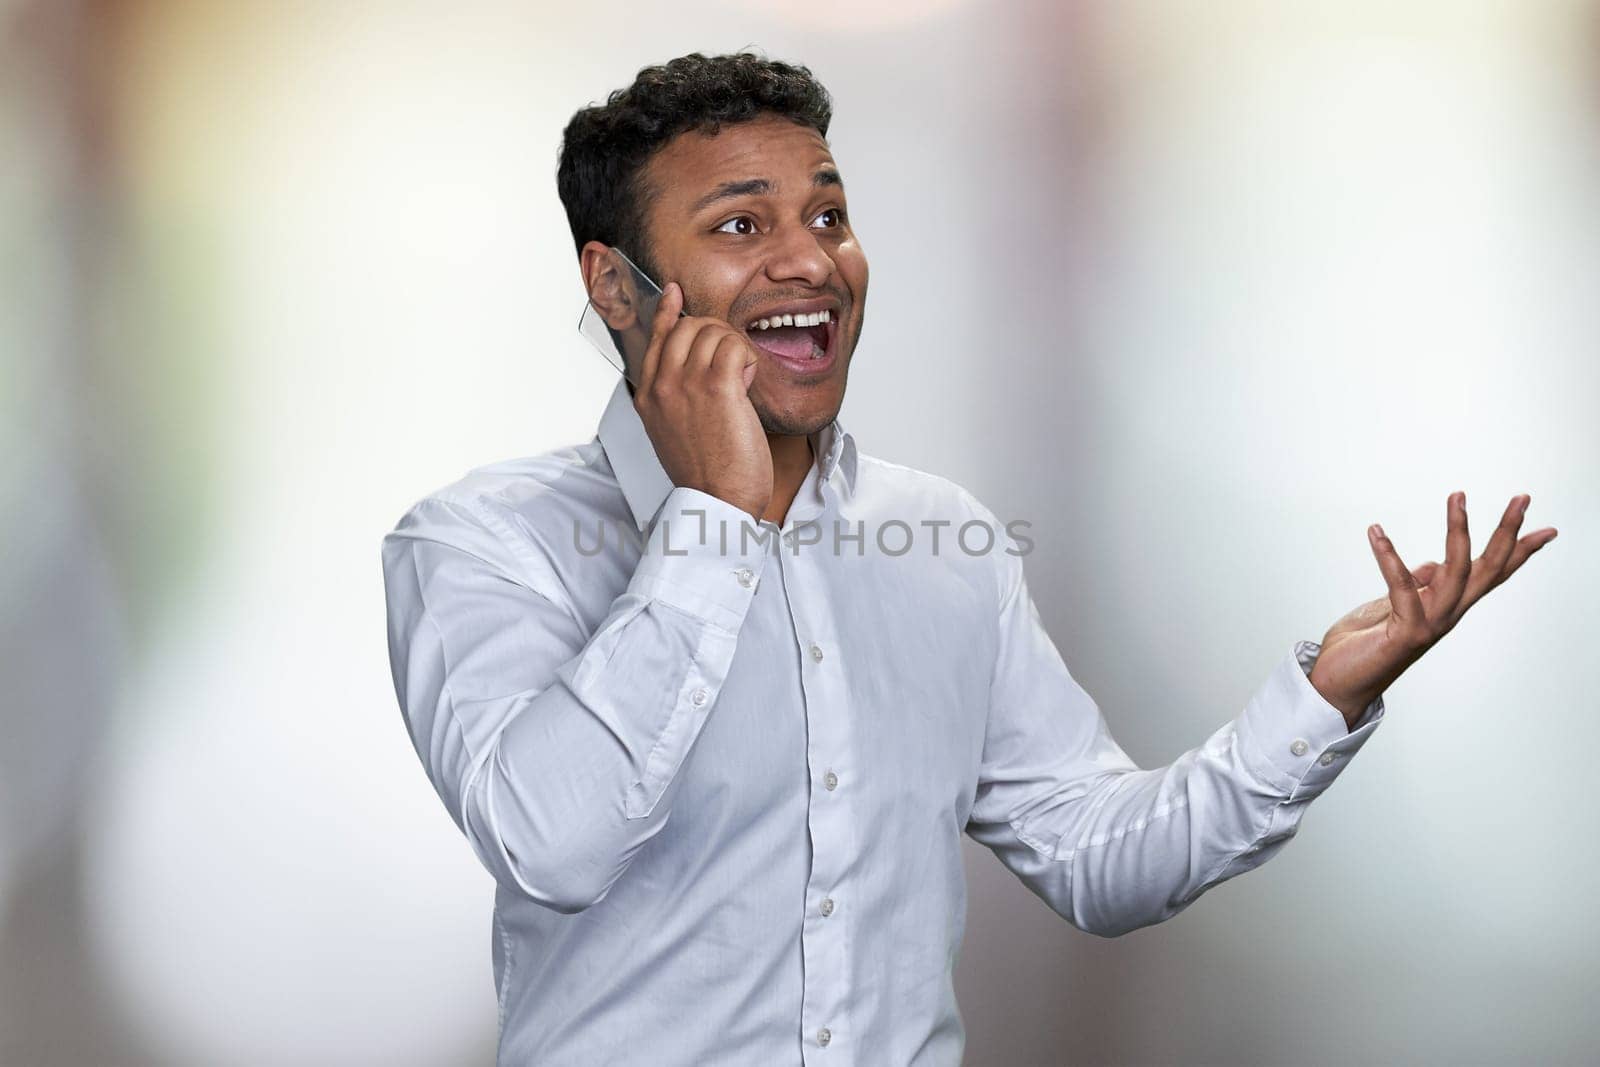 Portrait of young excited business man using futuristic mobile phone. Happy surprised man in white shirt talking on glass phone on abstract bokeh background.